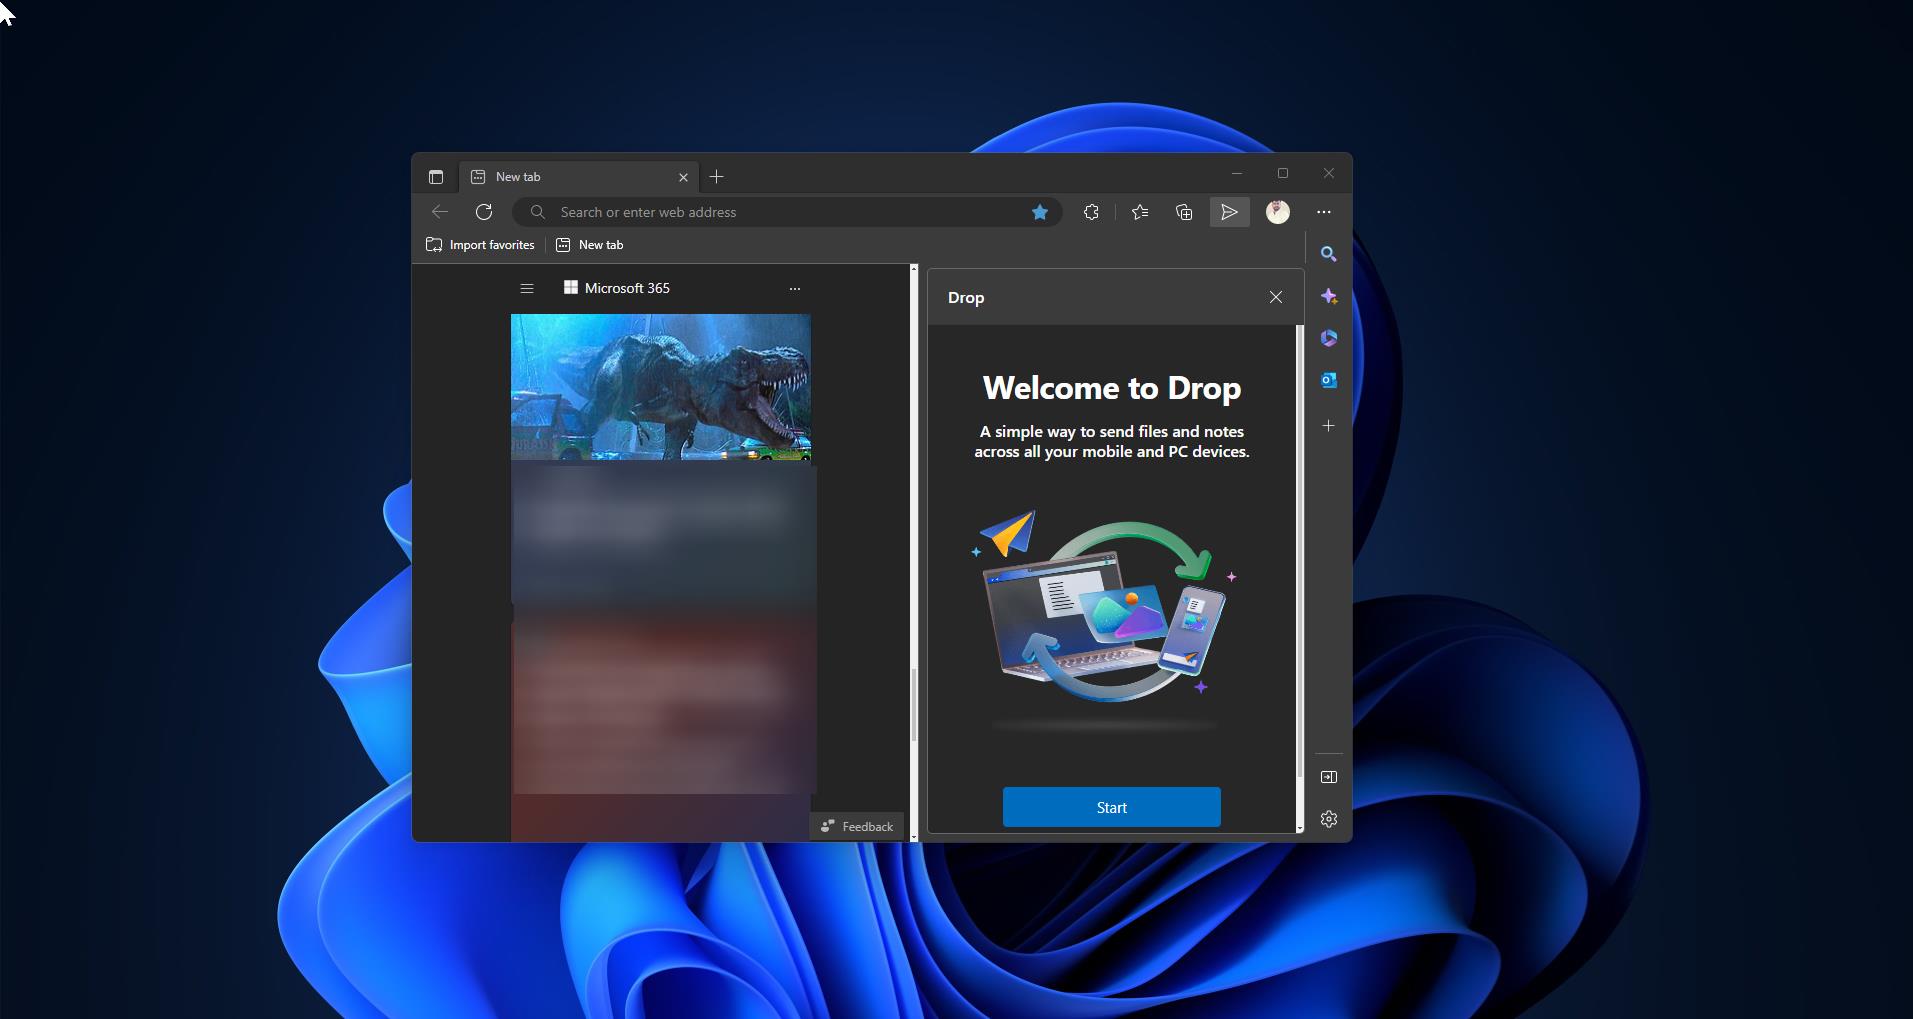 Drop feature in edge feature image